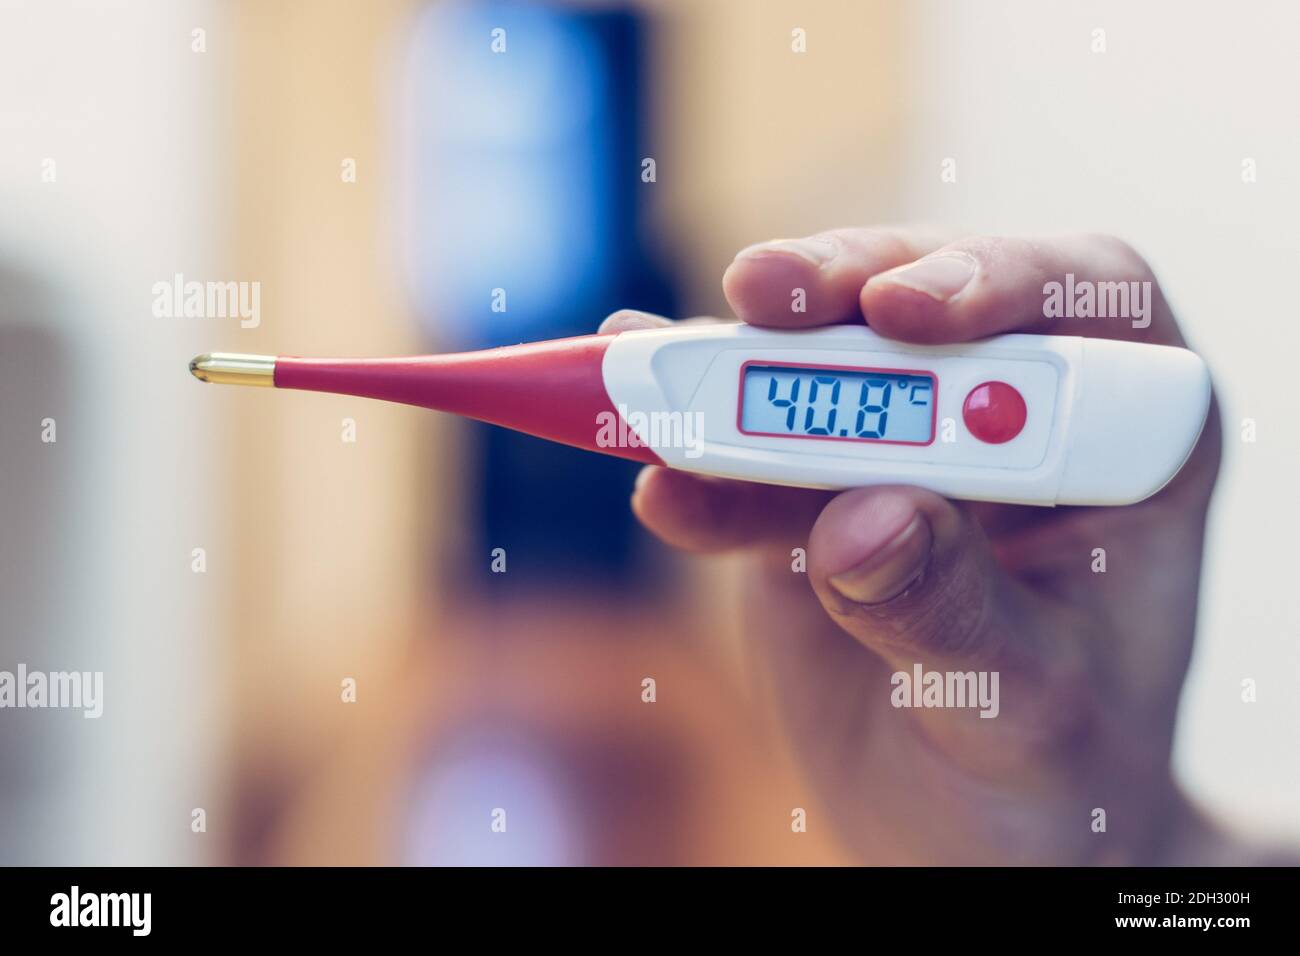 https://c8.alamy.com/comp/2DH300H/flu-and-corona-concept-man-is-holding-a-fever-thermometer-in-his-hand-close-up-2DH300H.jpg